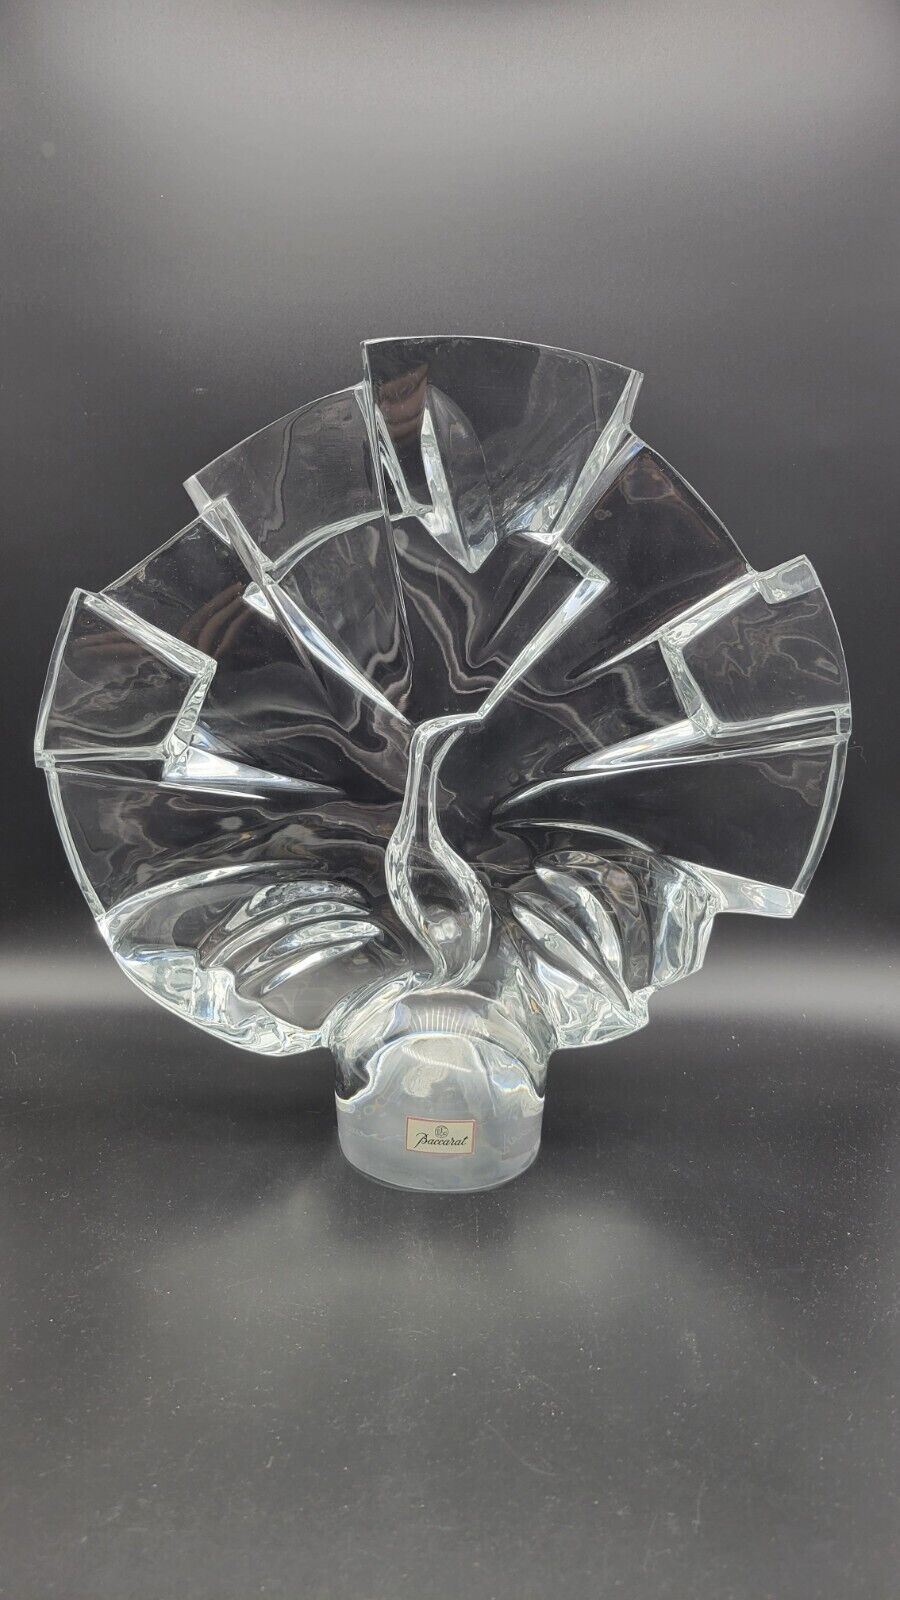 Large Baccarat Crystal France Peacock Centerpiece Sculpture by B AUGST, Limited